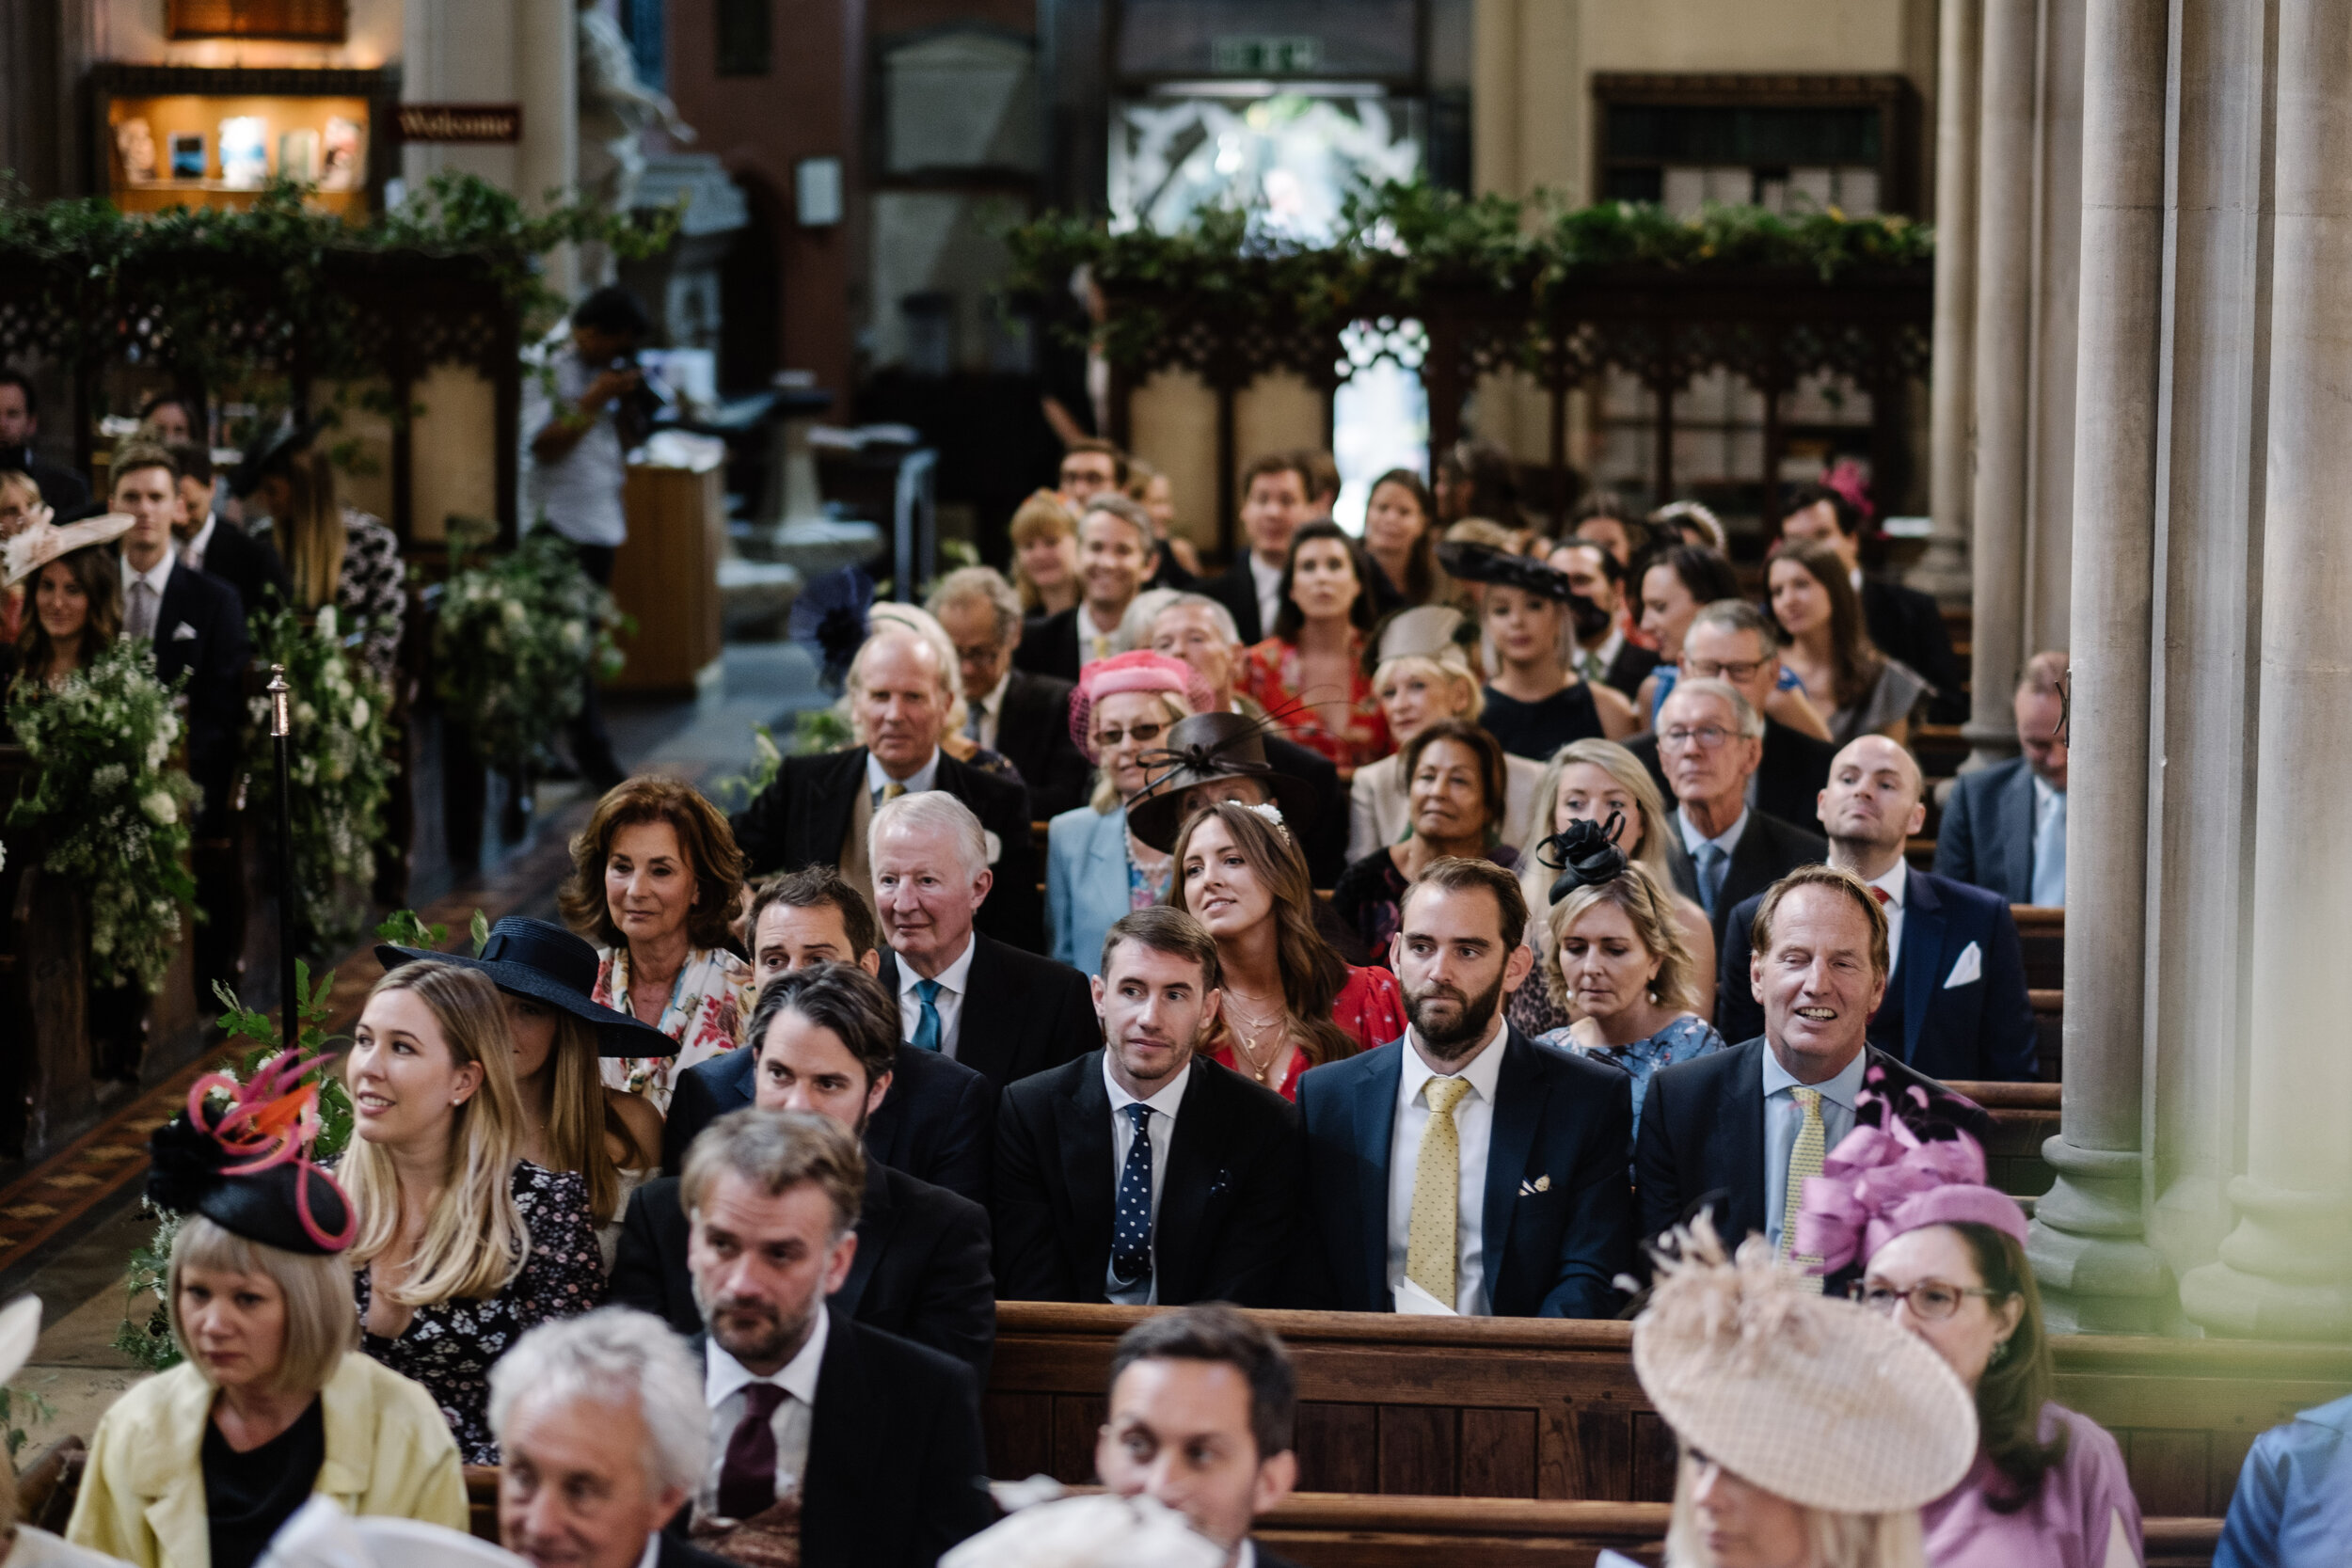 photo of wedding guests in church